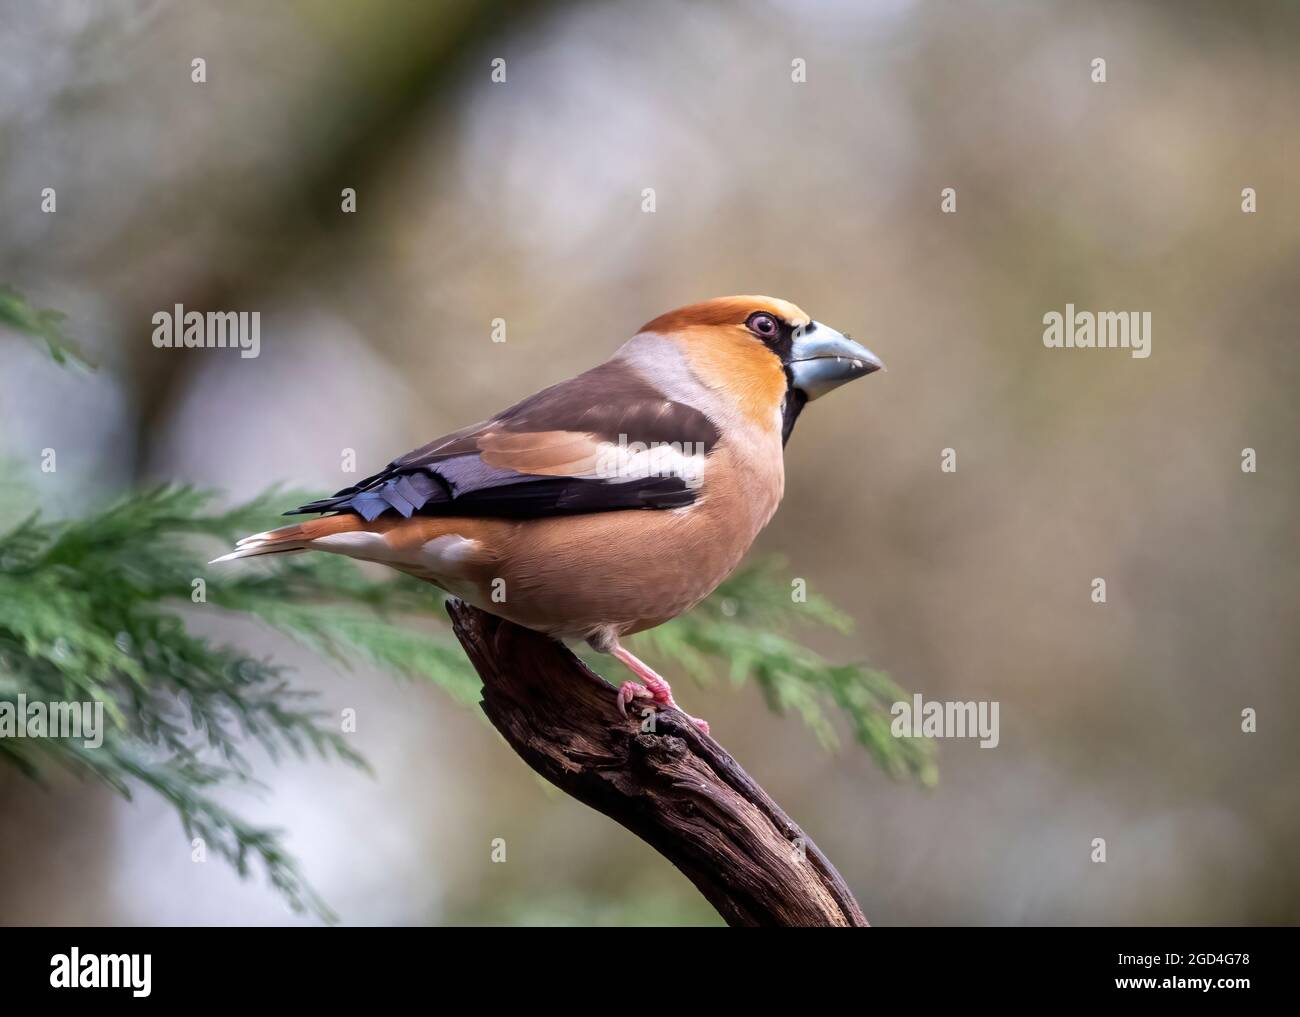 Hawfinch (Coccothraustes coccothraustes) perched on a branch Stock Photo